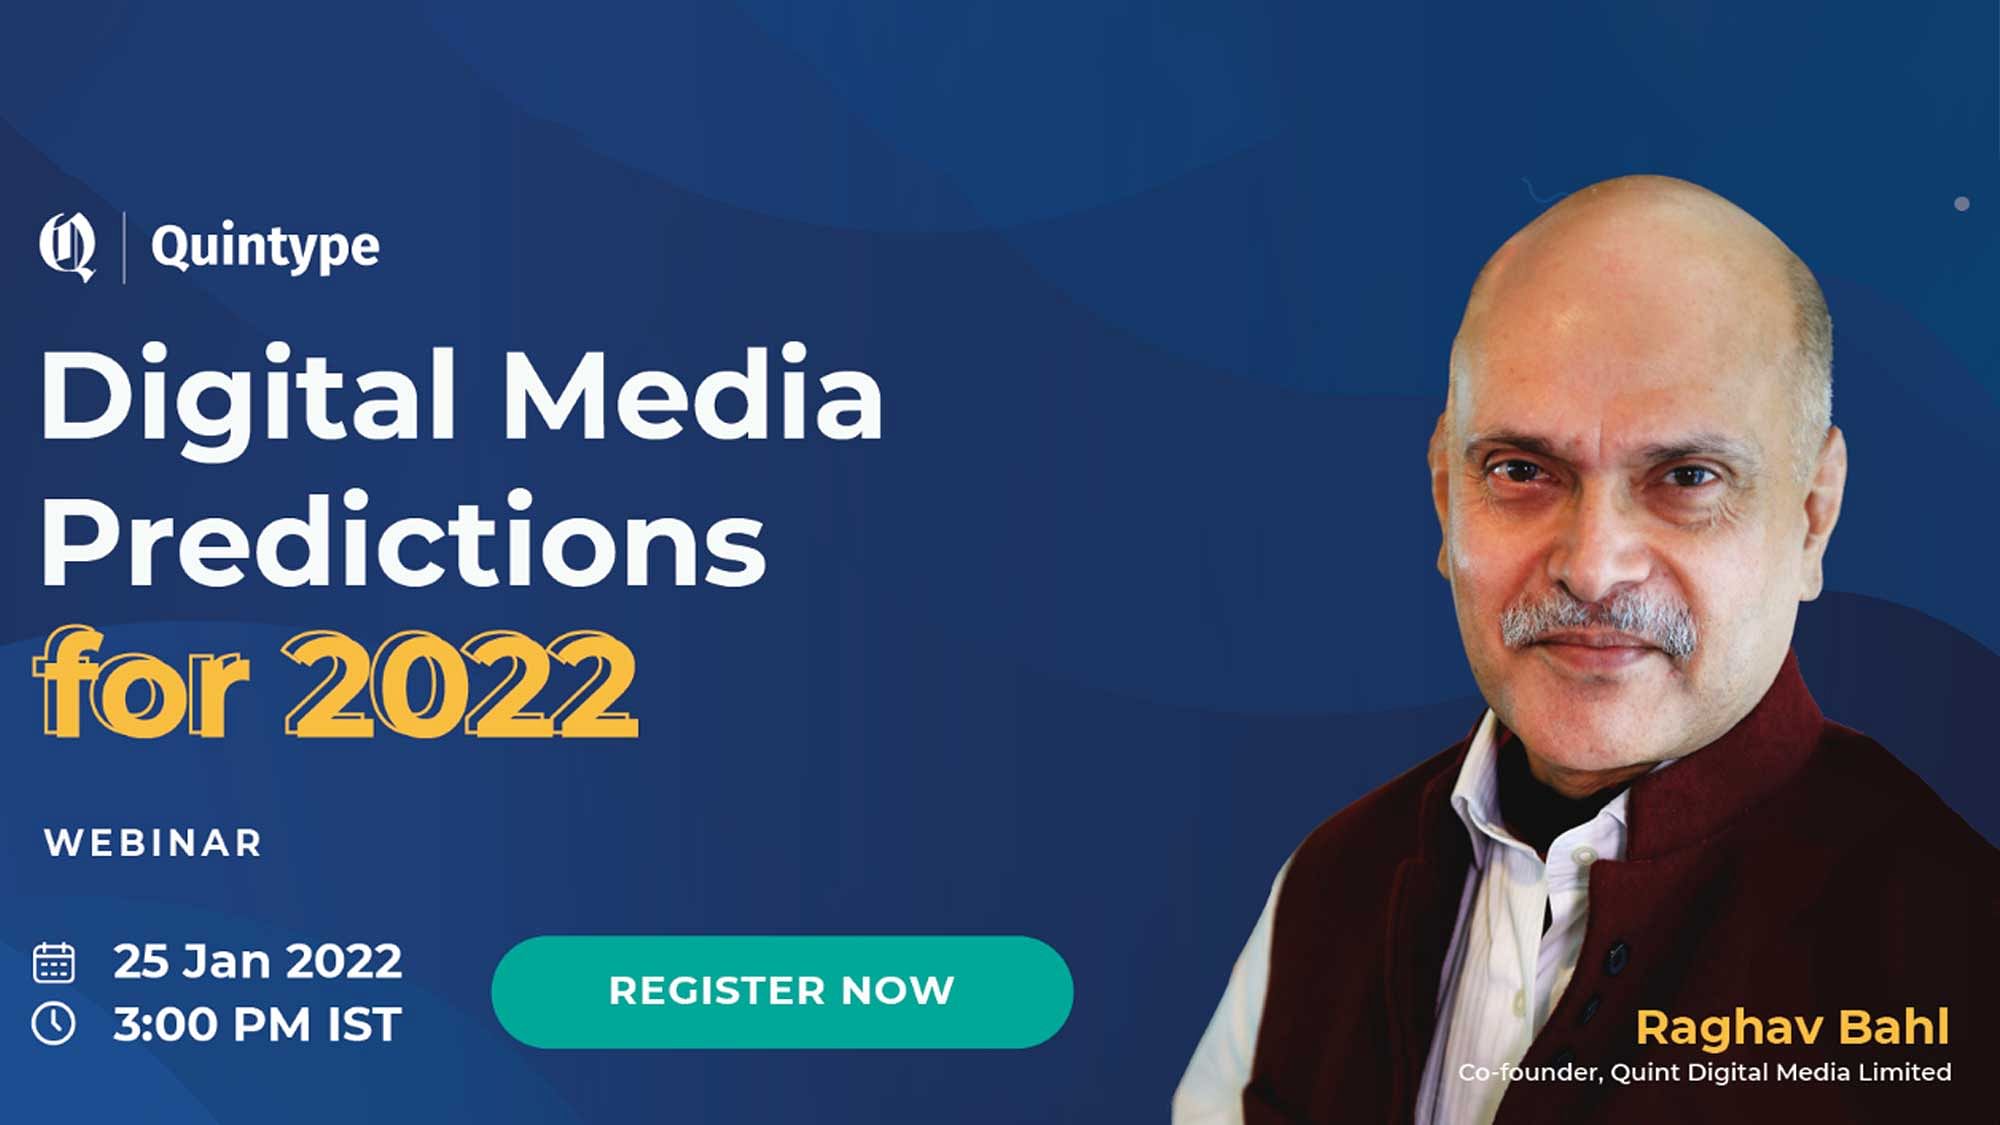 <div class="paragraphs"><p>Quintype is conducting a webinar on “Digital Media Predictions for 2022” with a stellar panel including Mr Raghav Bahl, co-founder at Quint Digital Media limited and Mr Chirdeep Shetty, CEO at Quintype Technologies.</p></div>